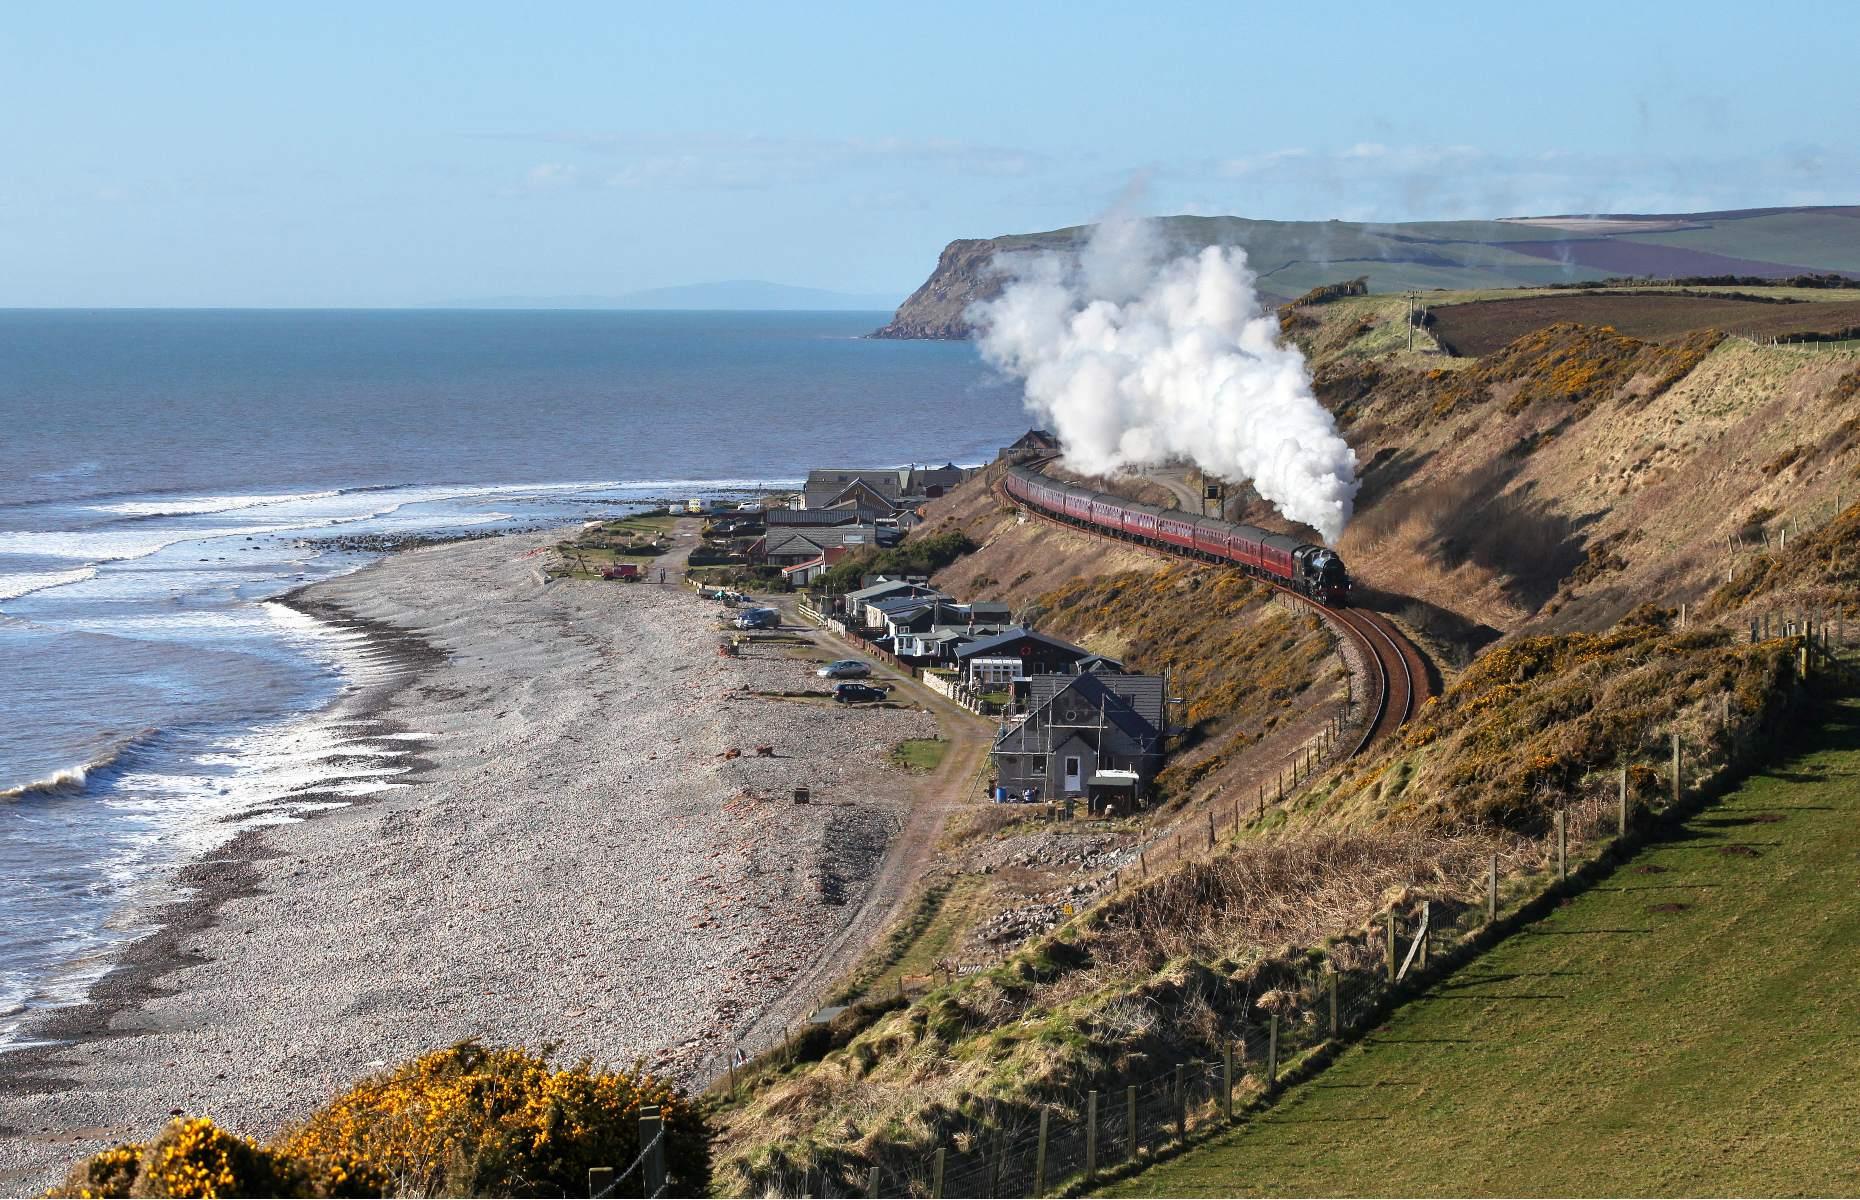 <p>The <a href="https://www.communityrailcumbria.co.uk/lines/cumbrian-coast-line/">Cumbrian Coast Line</a> is a wonderful route that loops through some of the county’s most spectacular sights and hidden gems. Trawling 85 miles (137km) from Barrow-in-Furness to Carlisle, the train takes travellers through rolling fields, striking fells and provides breathtaking views across the Irish Sea. The line's main attractions include Maryport, a tiny town that lies at the site of a Roman port and is steeped in history, the beautiful Black Combe fell and the incredible Lake District National Park. </p>